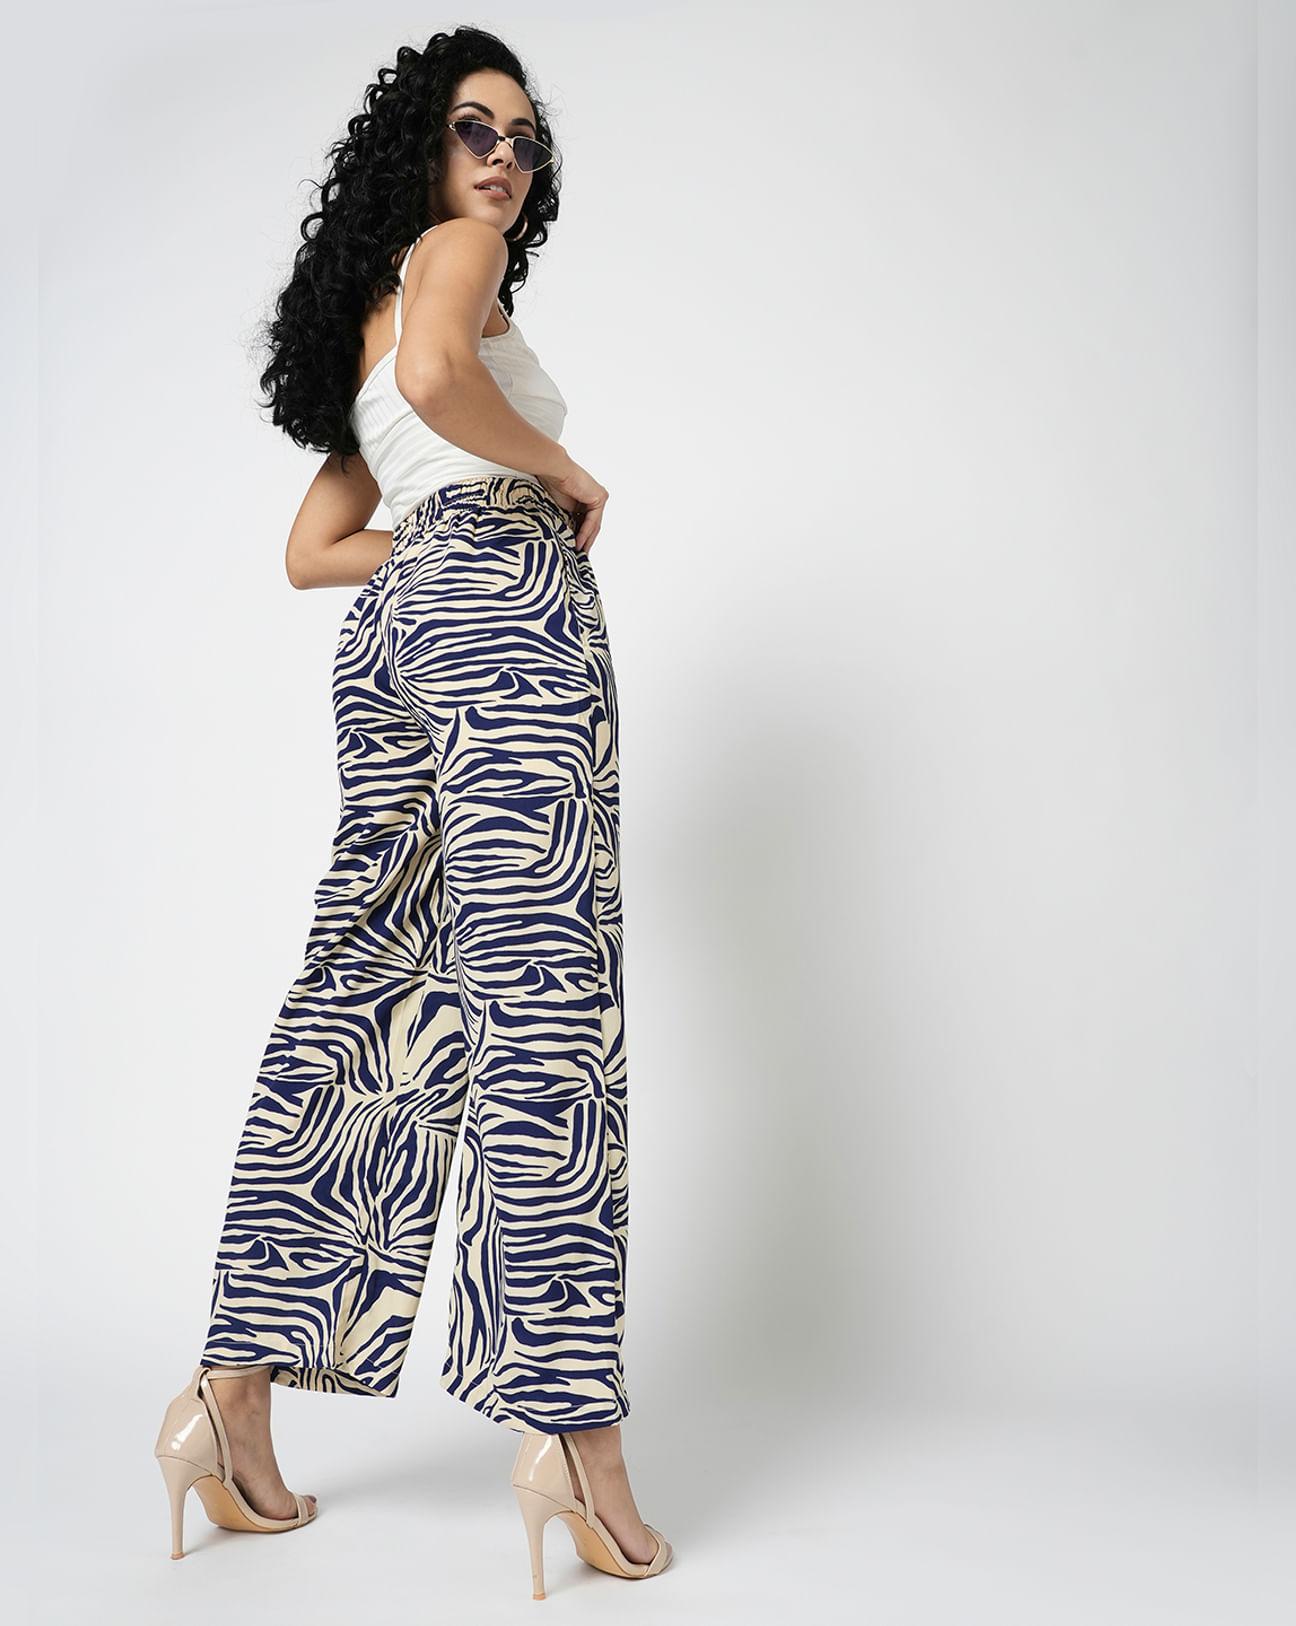 i.scenery-by-vero-moda-off-white-high-rise-printed-pants